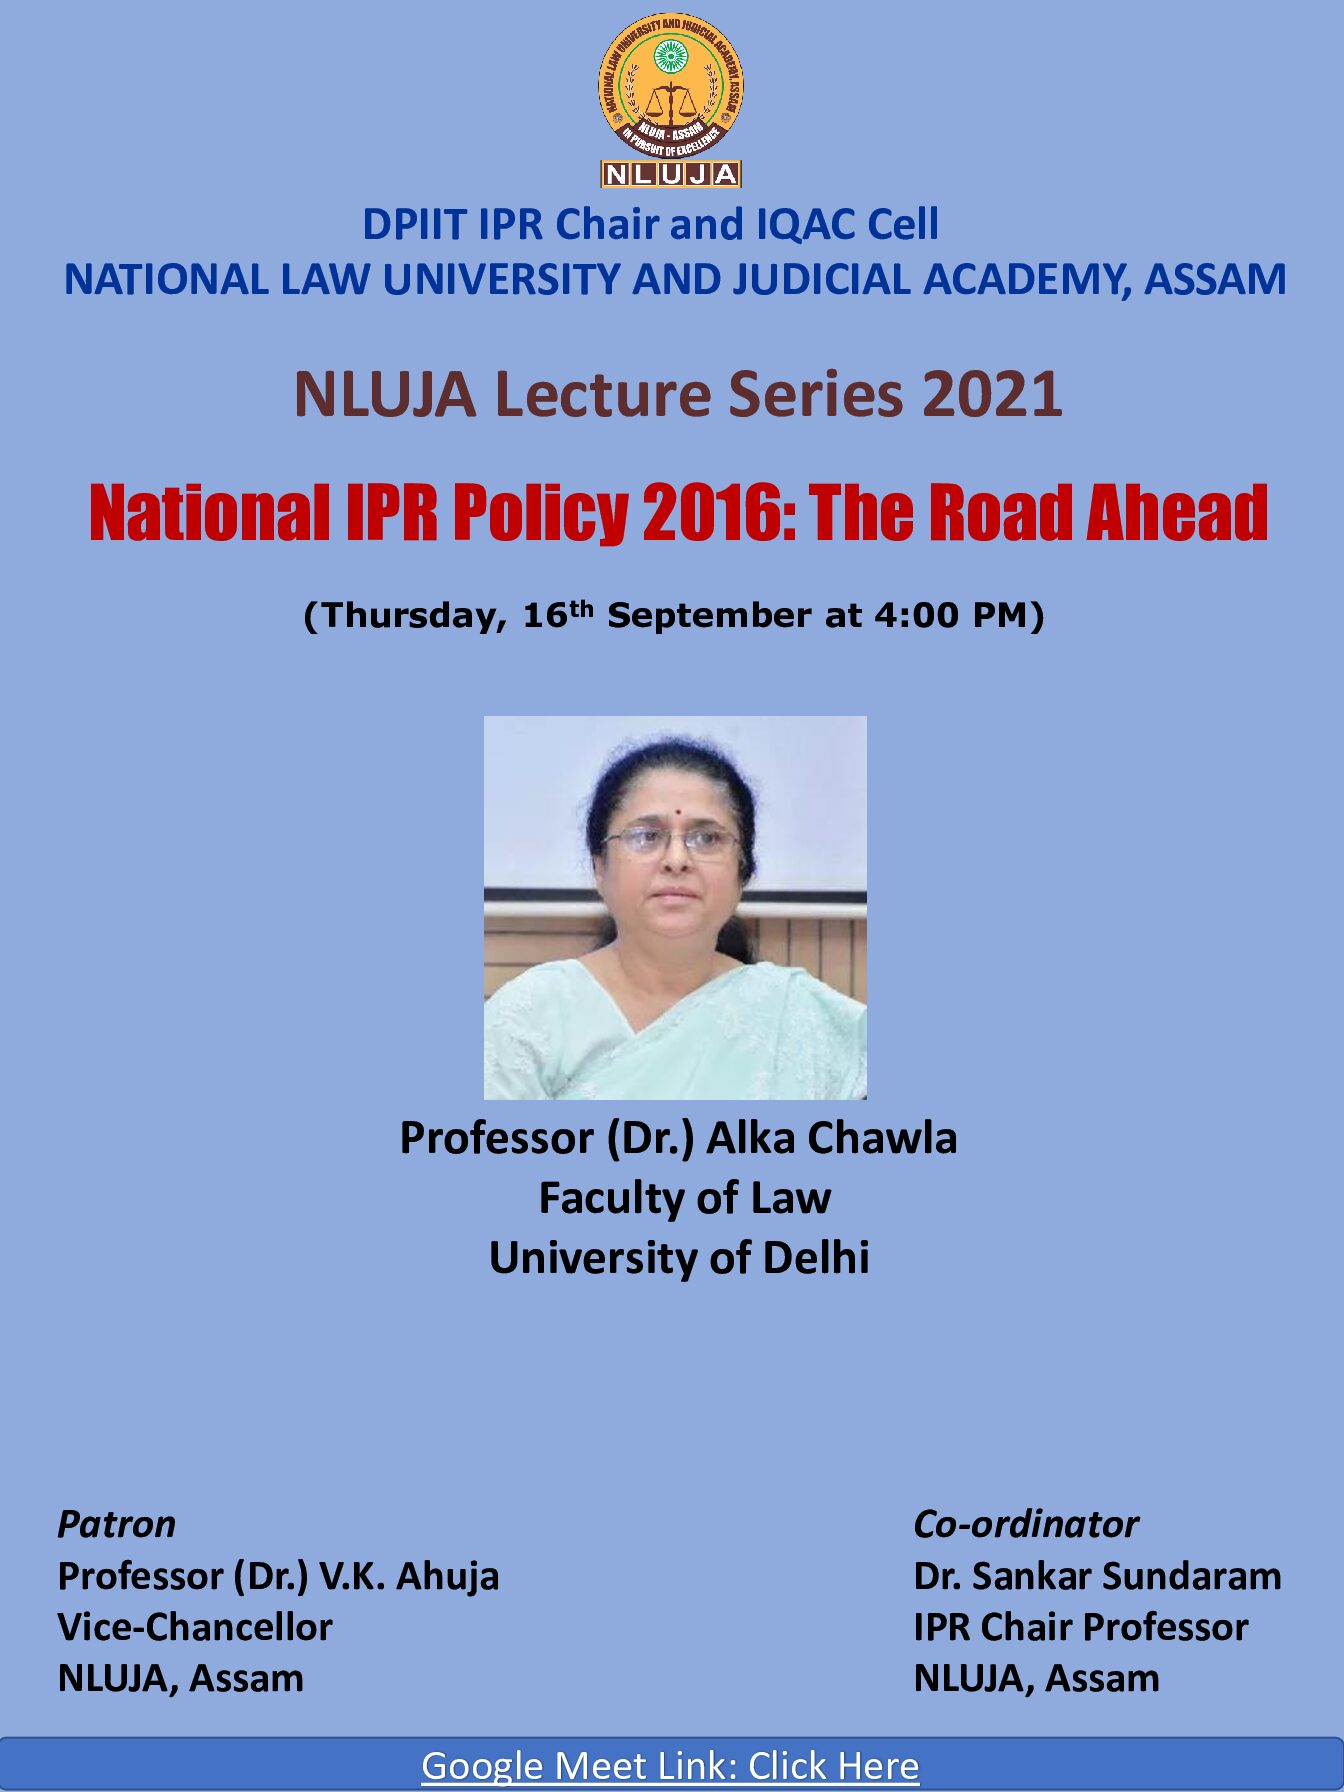 Webinar on “National IPR Policy 2016: The Road Ahead” by DPIIT-IPR Chair & IQAC Cell, NLU Assam [16th September, 2021]